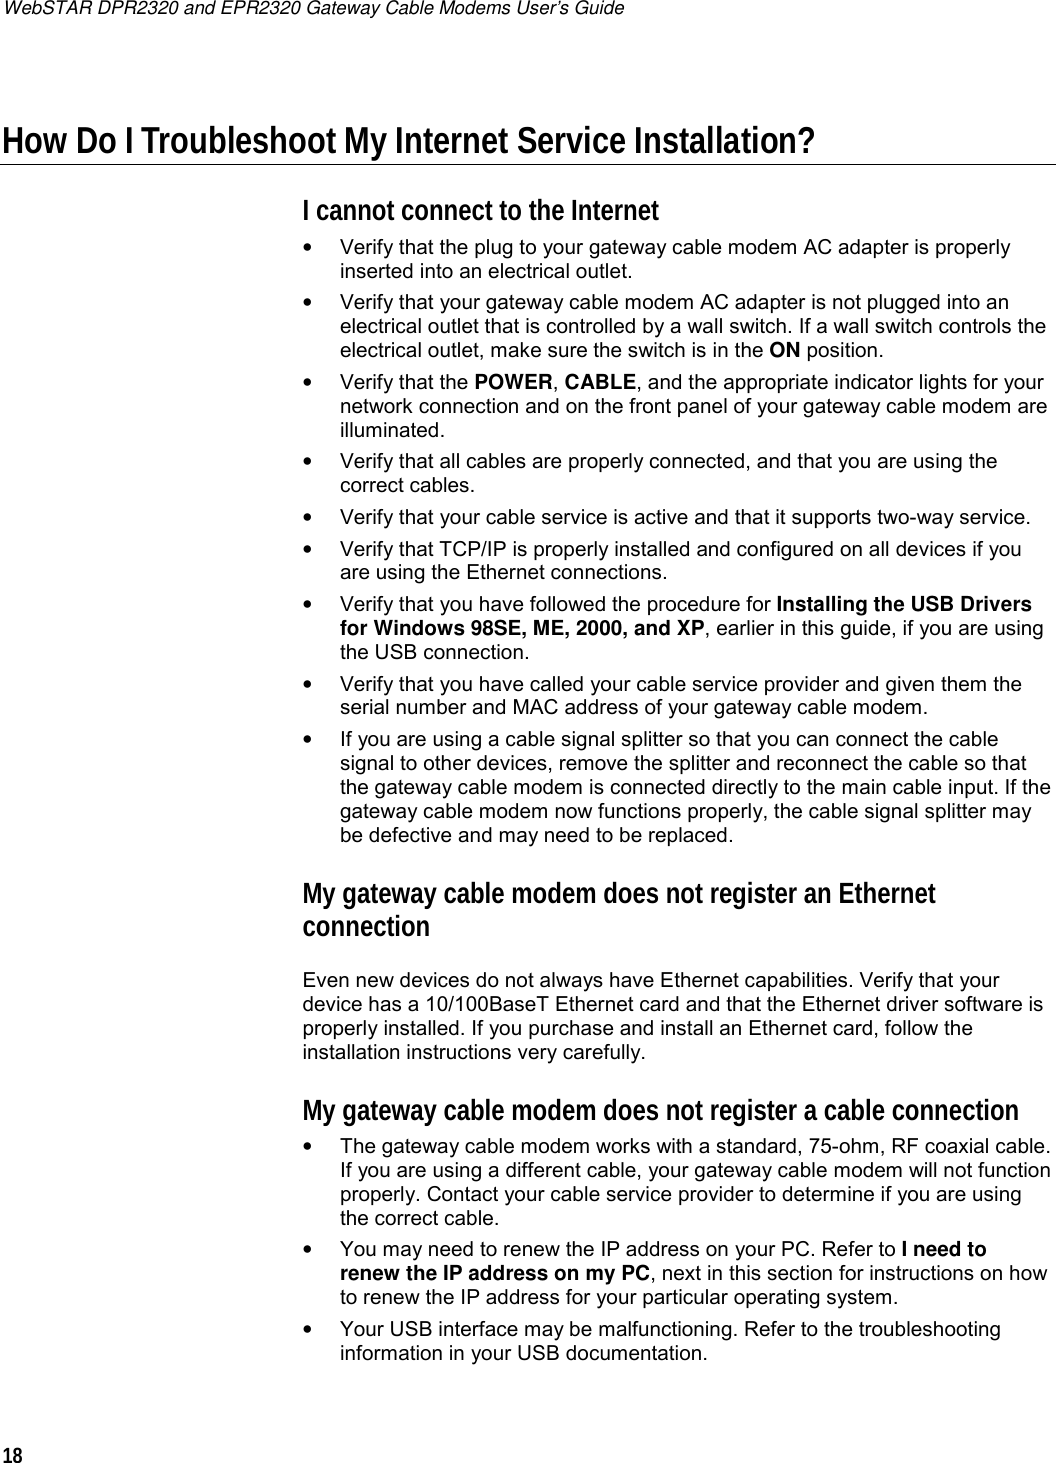 WebSTAR DPR2320 and EPR2320 Gateway Cable Modems User’s Guide 18  How Do I Troubleshoot My Internet Service Installation? I cannot connect to the Internet •  Verify that the plug to your gateway cable modem AC adapter is properly inserted into an electrical outlet. •  Verify that your gateway cable modem AC adapter is not plugged into an electrical outlet that is controlled by a wall switch. If a wall switch controls the electrical outlet, make sure the switch is in the ON position. • Verify that the POWER, CABLE, and the appropriate indicator lights for your network connection and on the front panel of your gateway cable modem are illuminated. •  Verify that all cables are properly connected, and that you are using the correct cables. •  Verify that your cable service is active and that it supports two-way service. •  Verify that TCP/IP is properly installed and configured on all devices if you are using the Ethernet connections. •  Verify that you have followed the procedure for Installing the USB Drivers for Windows 98SE, ME, 2000, and XP, earlier in this guide, if you are using the USB connection. •  Verify that you have called your cable service provider and given them the serial number and MAC address of your gateway cable modem. •  If you are using a cable signal splitter so that you can connect the cable signal to other devices, remove the splitter and reconnect the cable so that the gateway cable modem is connected directly to the main cable input. If the gateway cable modem now functions properly, the cable signal splitter may be defective and may need to be replaced. My gateway cable modem does not register an Ethernet connection Even new devices do not always have Ethernet capabilities. Verify that your device has a 10/100BaseT Ethernet card and that the Ethernet driver software is properly installed. If you purchase and install an Ethernet card, follow the installation instructions very carefully. My gateway cable modem does not register a cable connection •  The gateway cable modem works with a standard, 75-ohm, RF coaxial cable. If you are using a different cable, your gateway cable modem will not function properly. Contact your cable service provider to determine if you are using the correct cable. •  You may need to renew the IP address on your PC. Refer to I need to renew the IP address on my PC, next in this section for instructions on how to renew the IP address for your particular operating system. •  Your USB interface may be malfunctioning. Refer to the troubleshooting information in your USB documentation. 